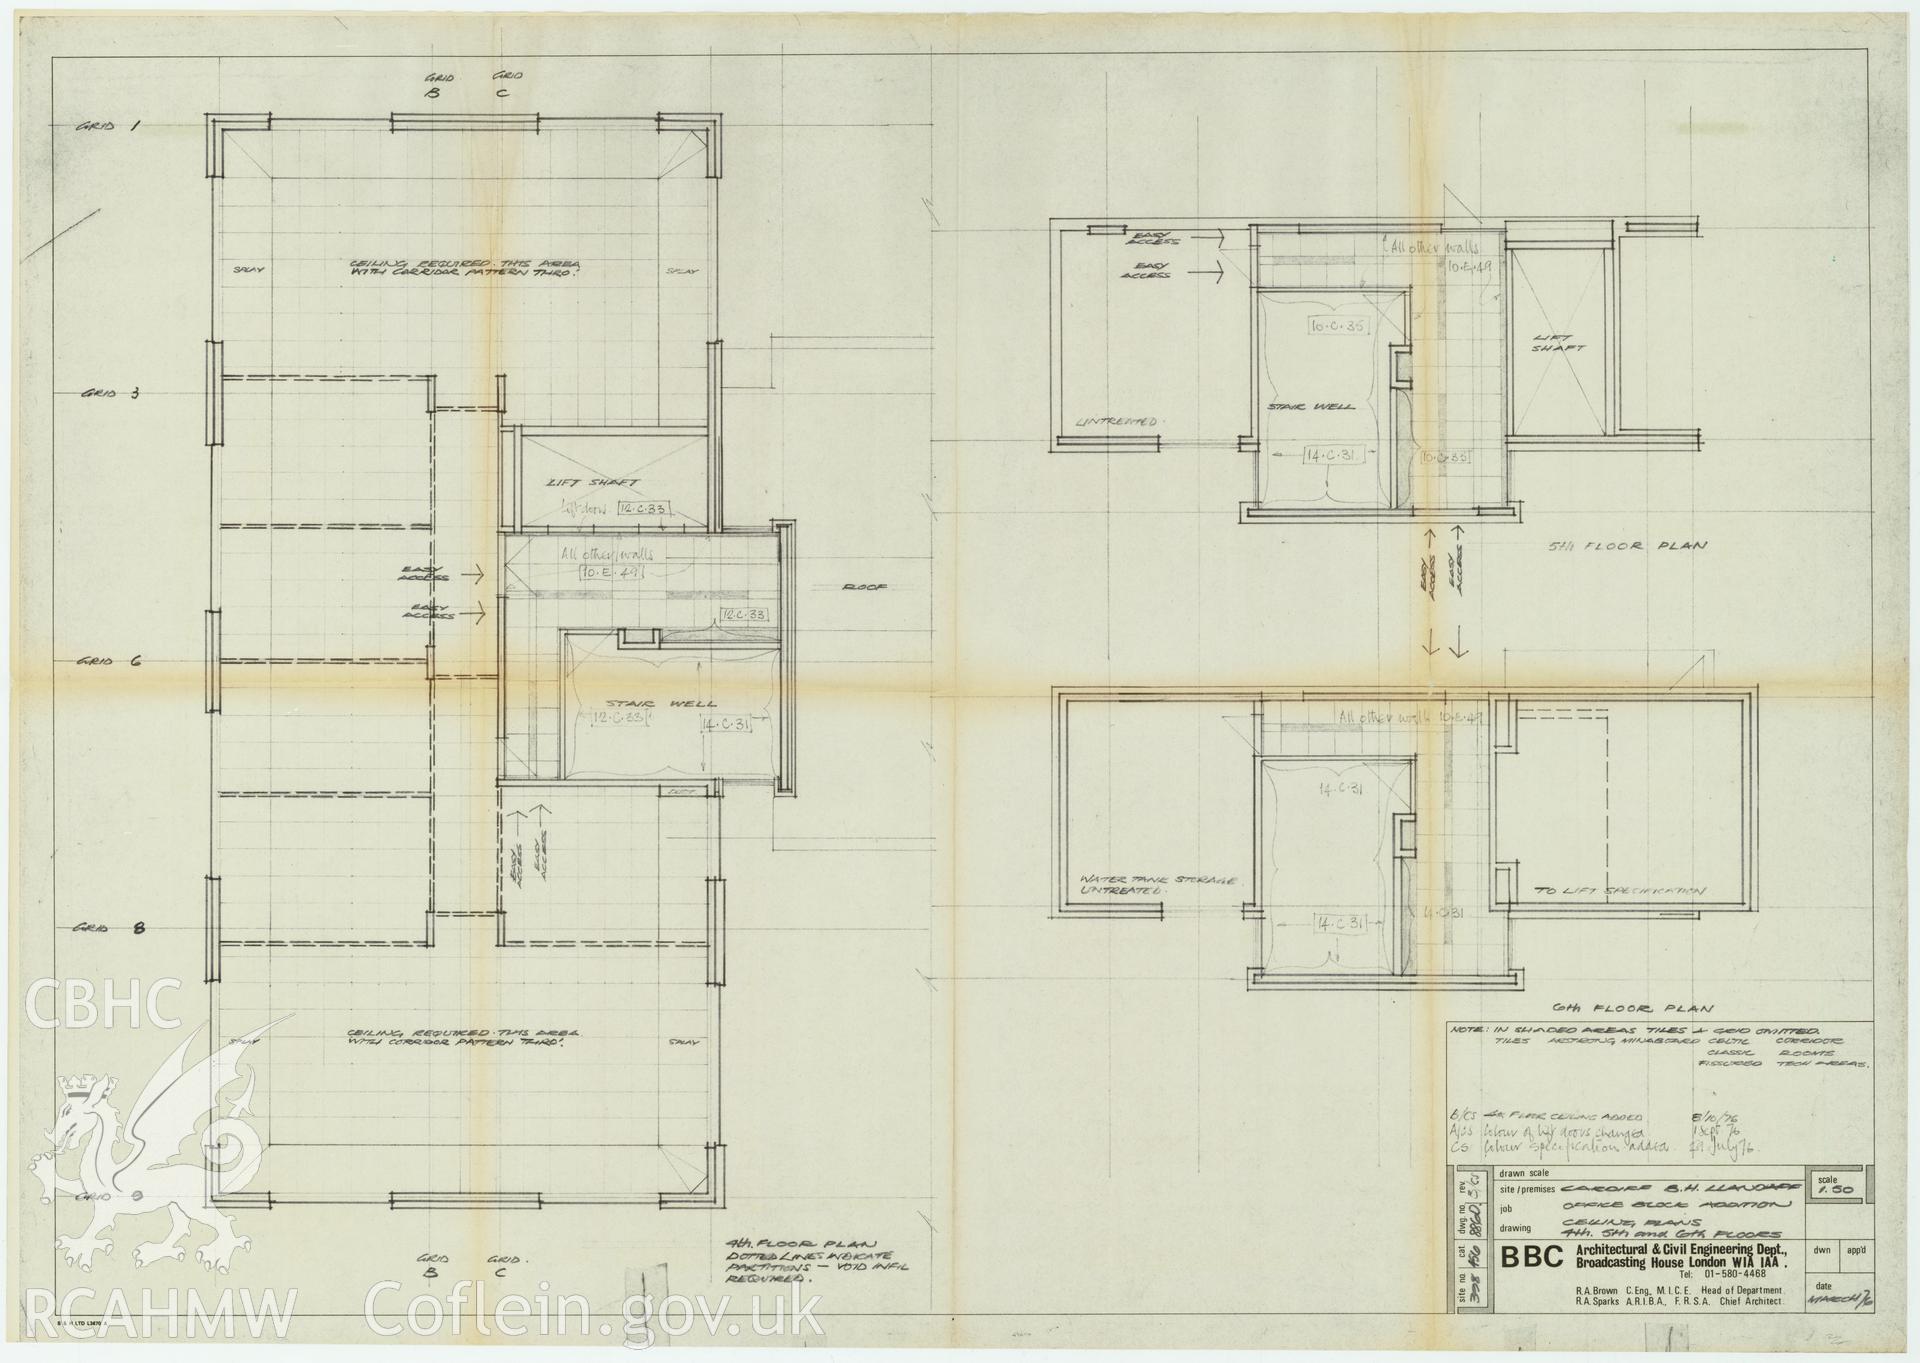 Digitised drawing plan of Llandaff office block addition, Cardiff. Fourth, fifth and sixth floor ceiling plans. Drawing no. 886d B/cs, March 1976.